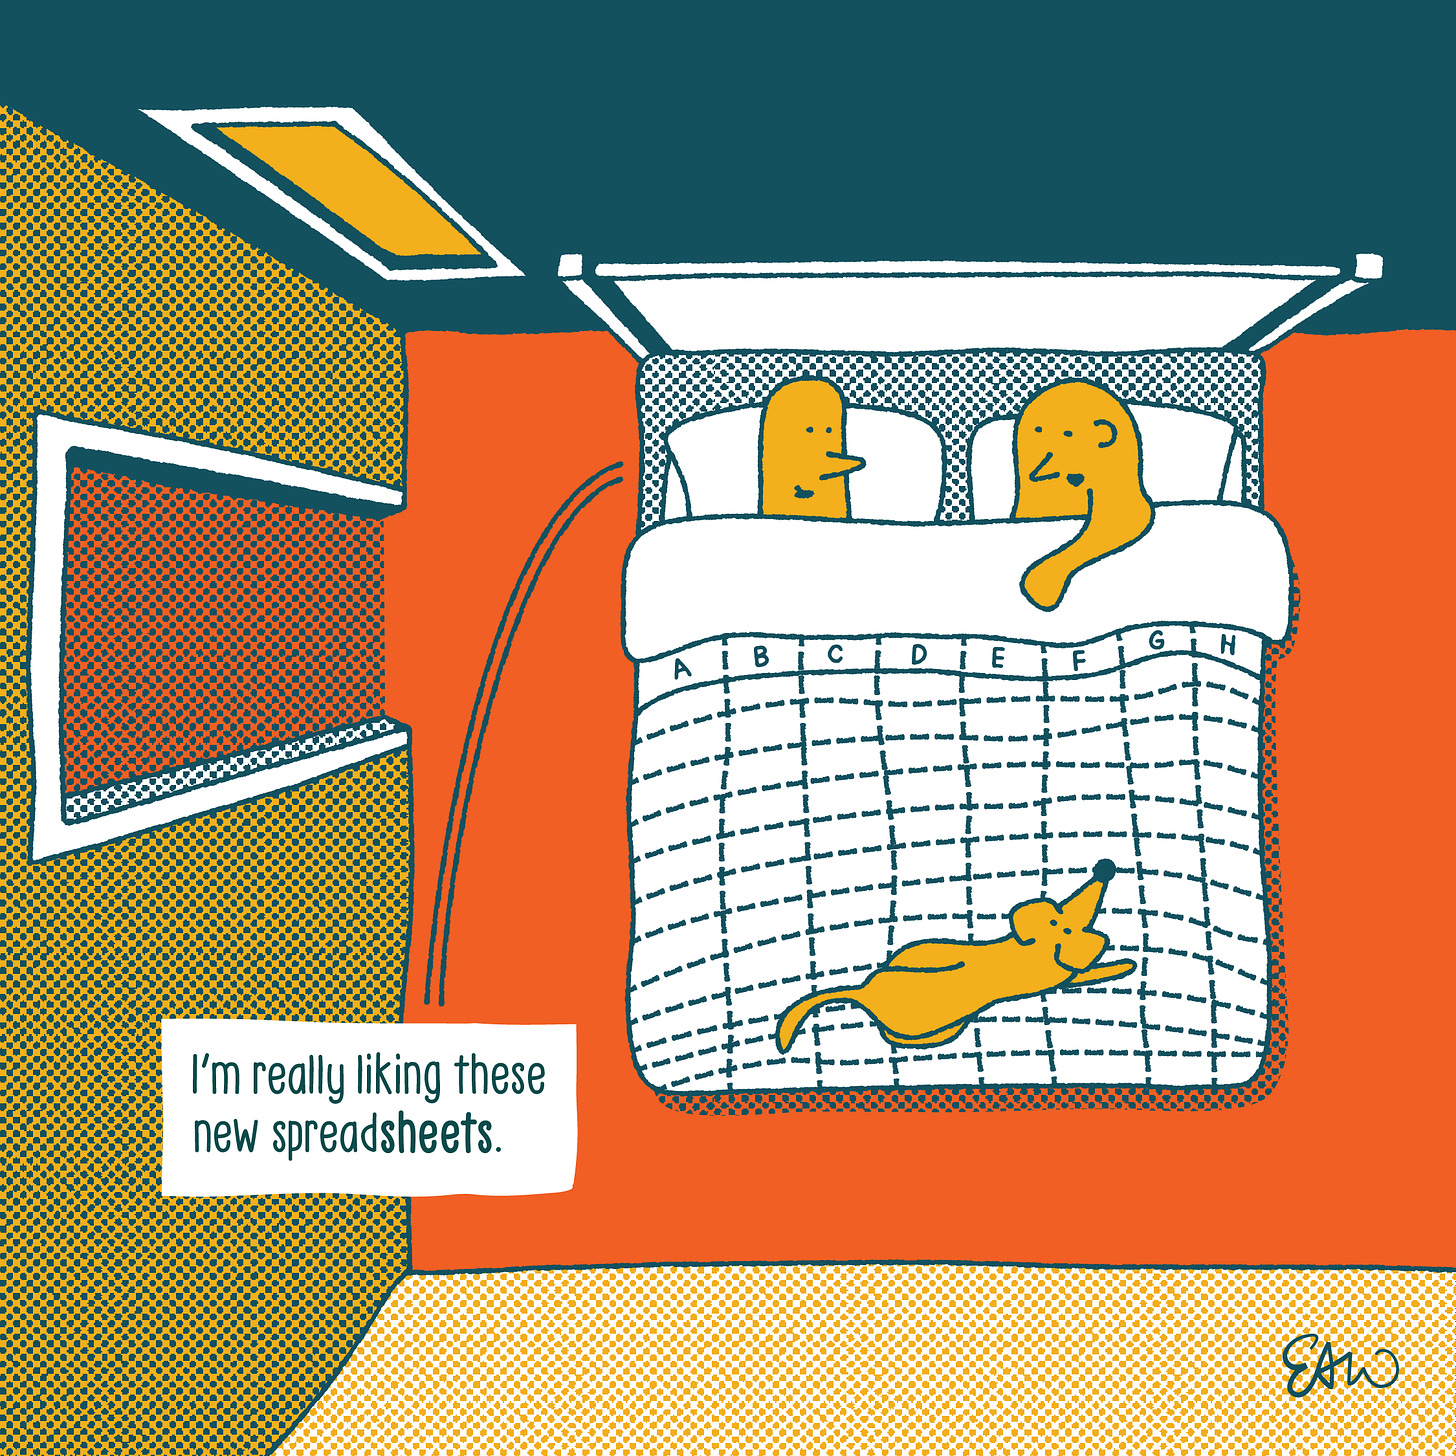 A cartoon drawn in a retro style in a yellow, orange and dark teal palette with half-tones for shading. The composition is a birds-eye view of two people in bed with a dog at their feet. The pattern in their comforter duvet looks like a Microsoft Excel spreadsheet. The caption reads, “I’m really liking these new spreadsheets.” The word “sheets” is bolded.